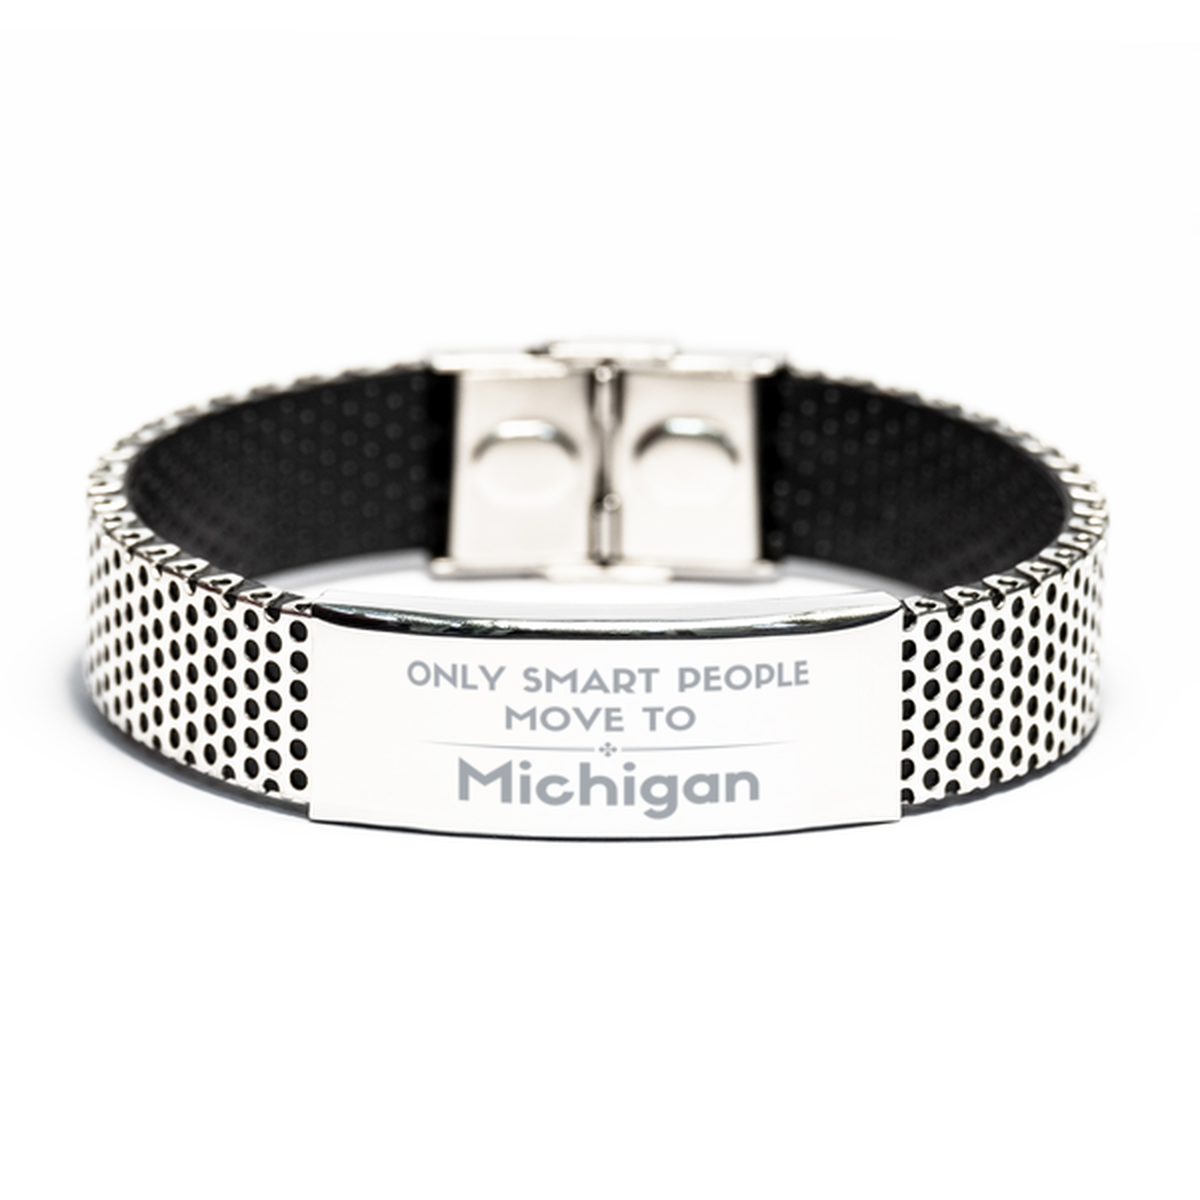 Only smart people move to Michigan Stainless Steel Bracelet, Gag Gifts For Michigan, Move to Michigan Gifts for Friends Coworker Funny Saying Quote